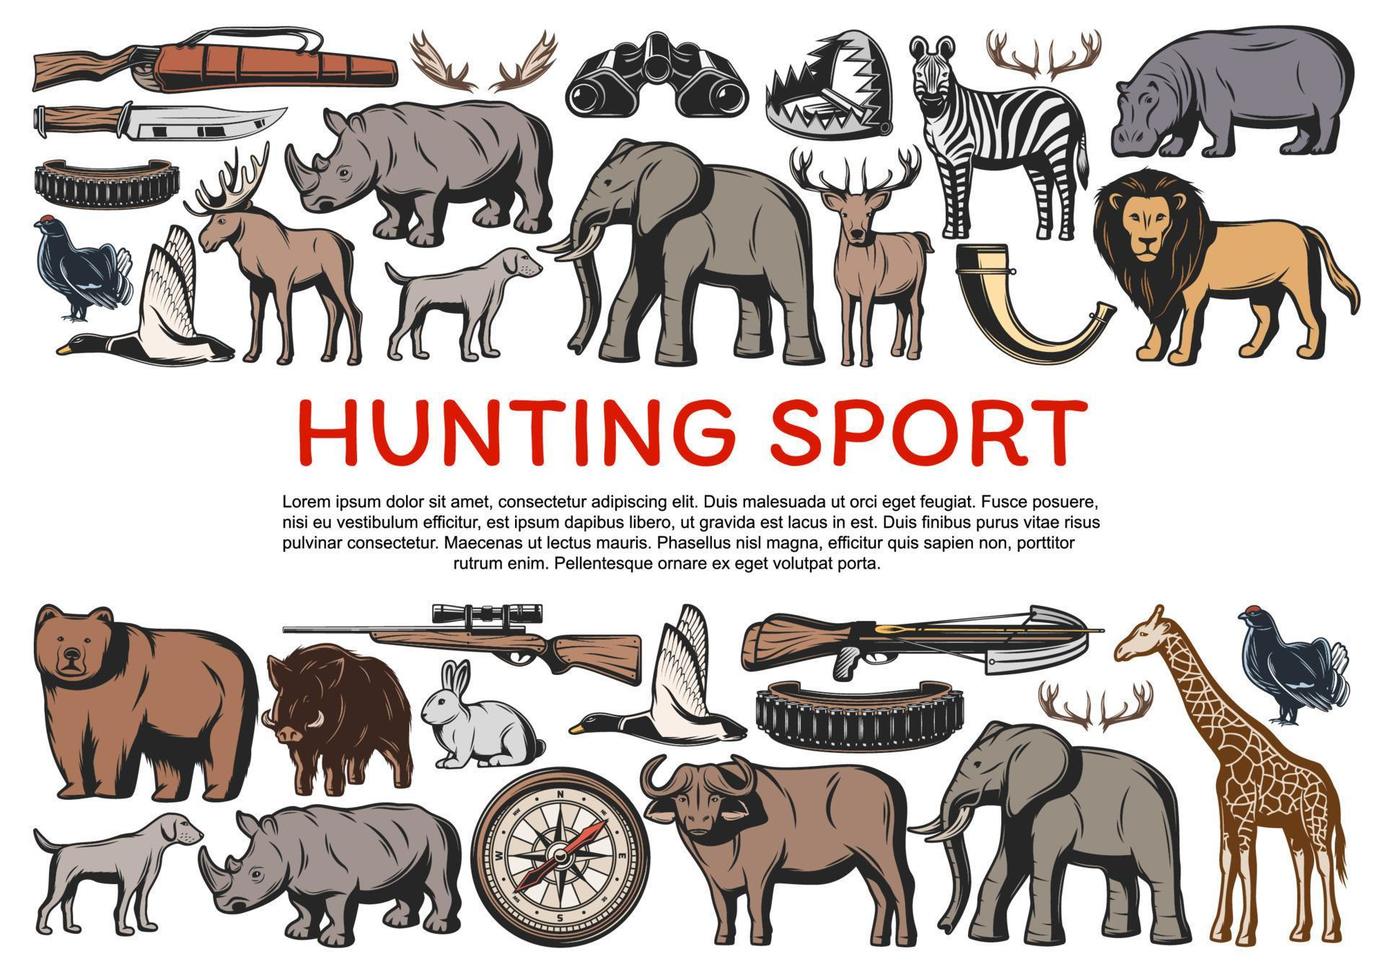 Animals and birds, weapons for hunting sport icons vector